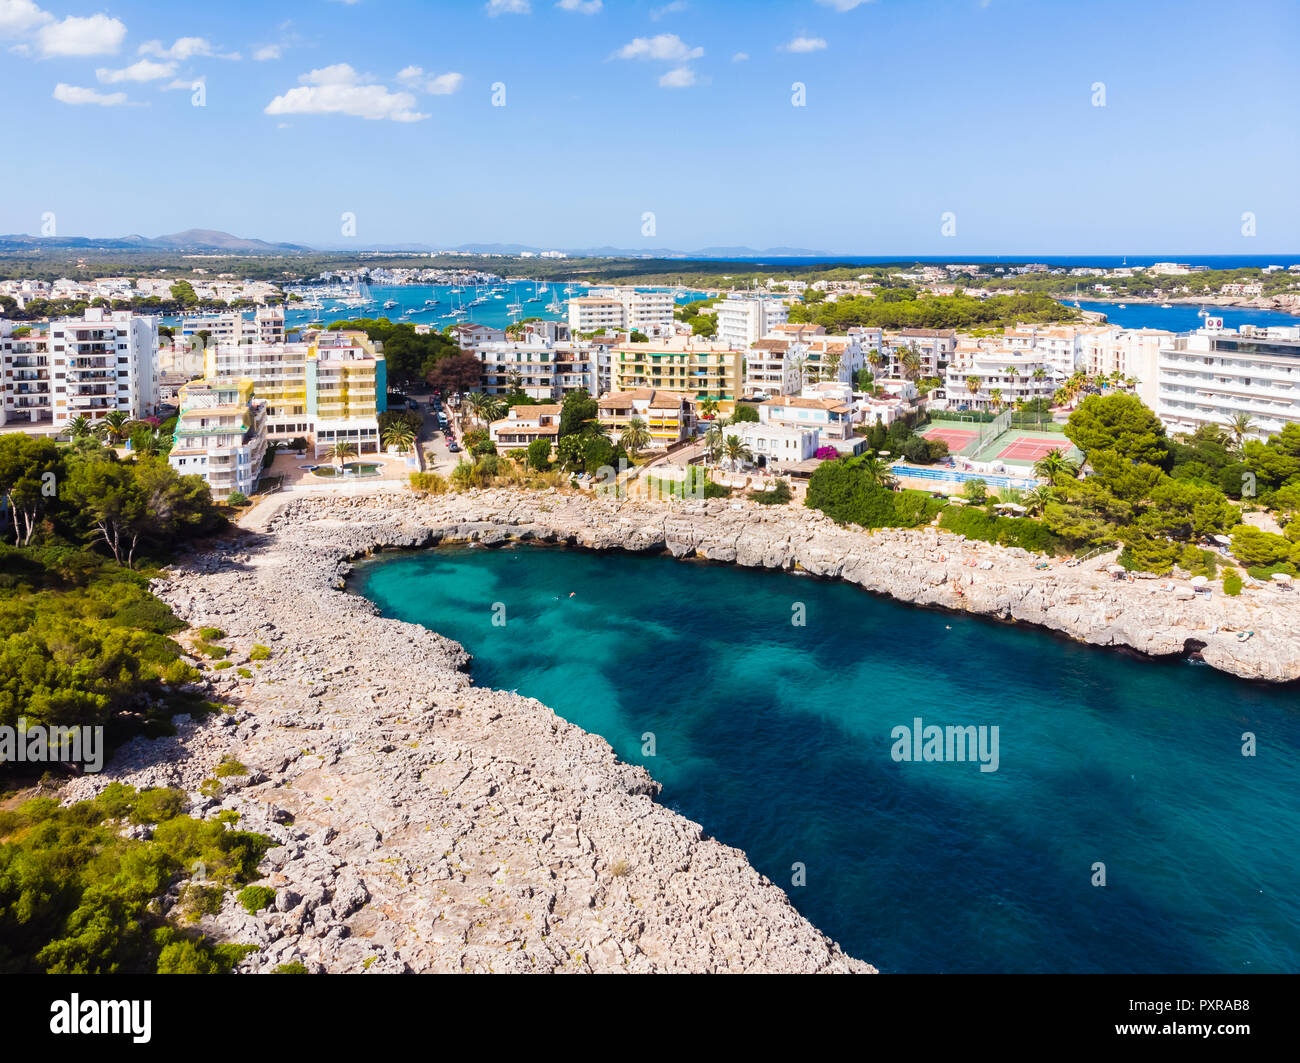 Spain, Mallorca, Portocolom, Aerial view of Punta des Jonc, Bay of Cala Marcal, Hotels Stock Photo